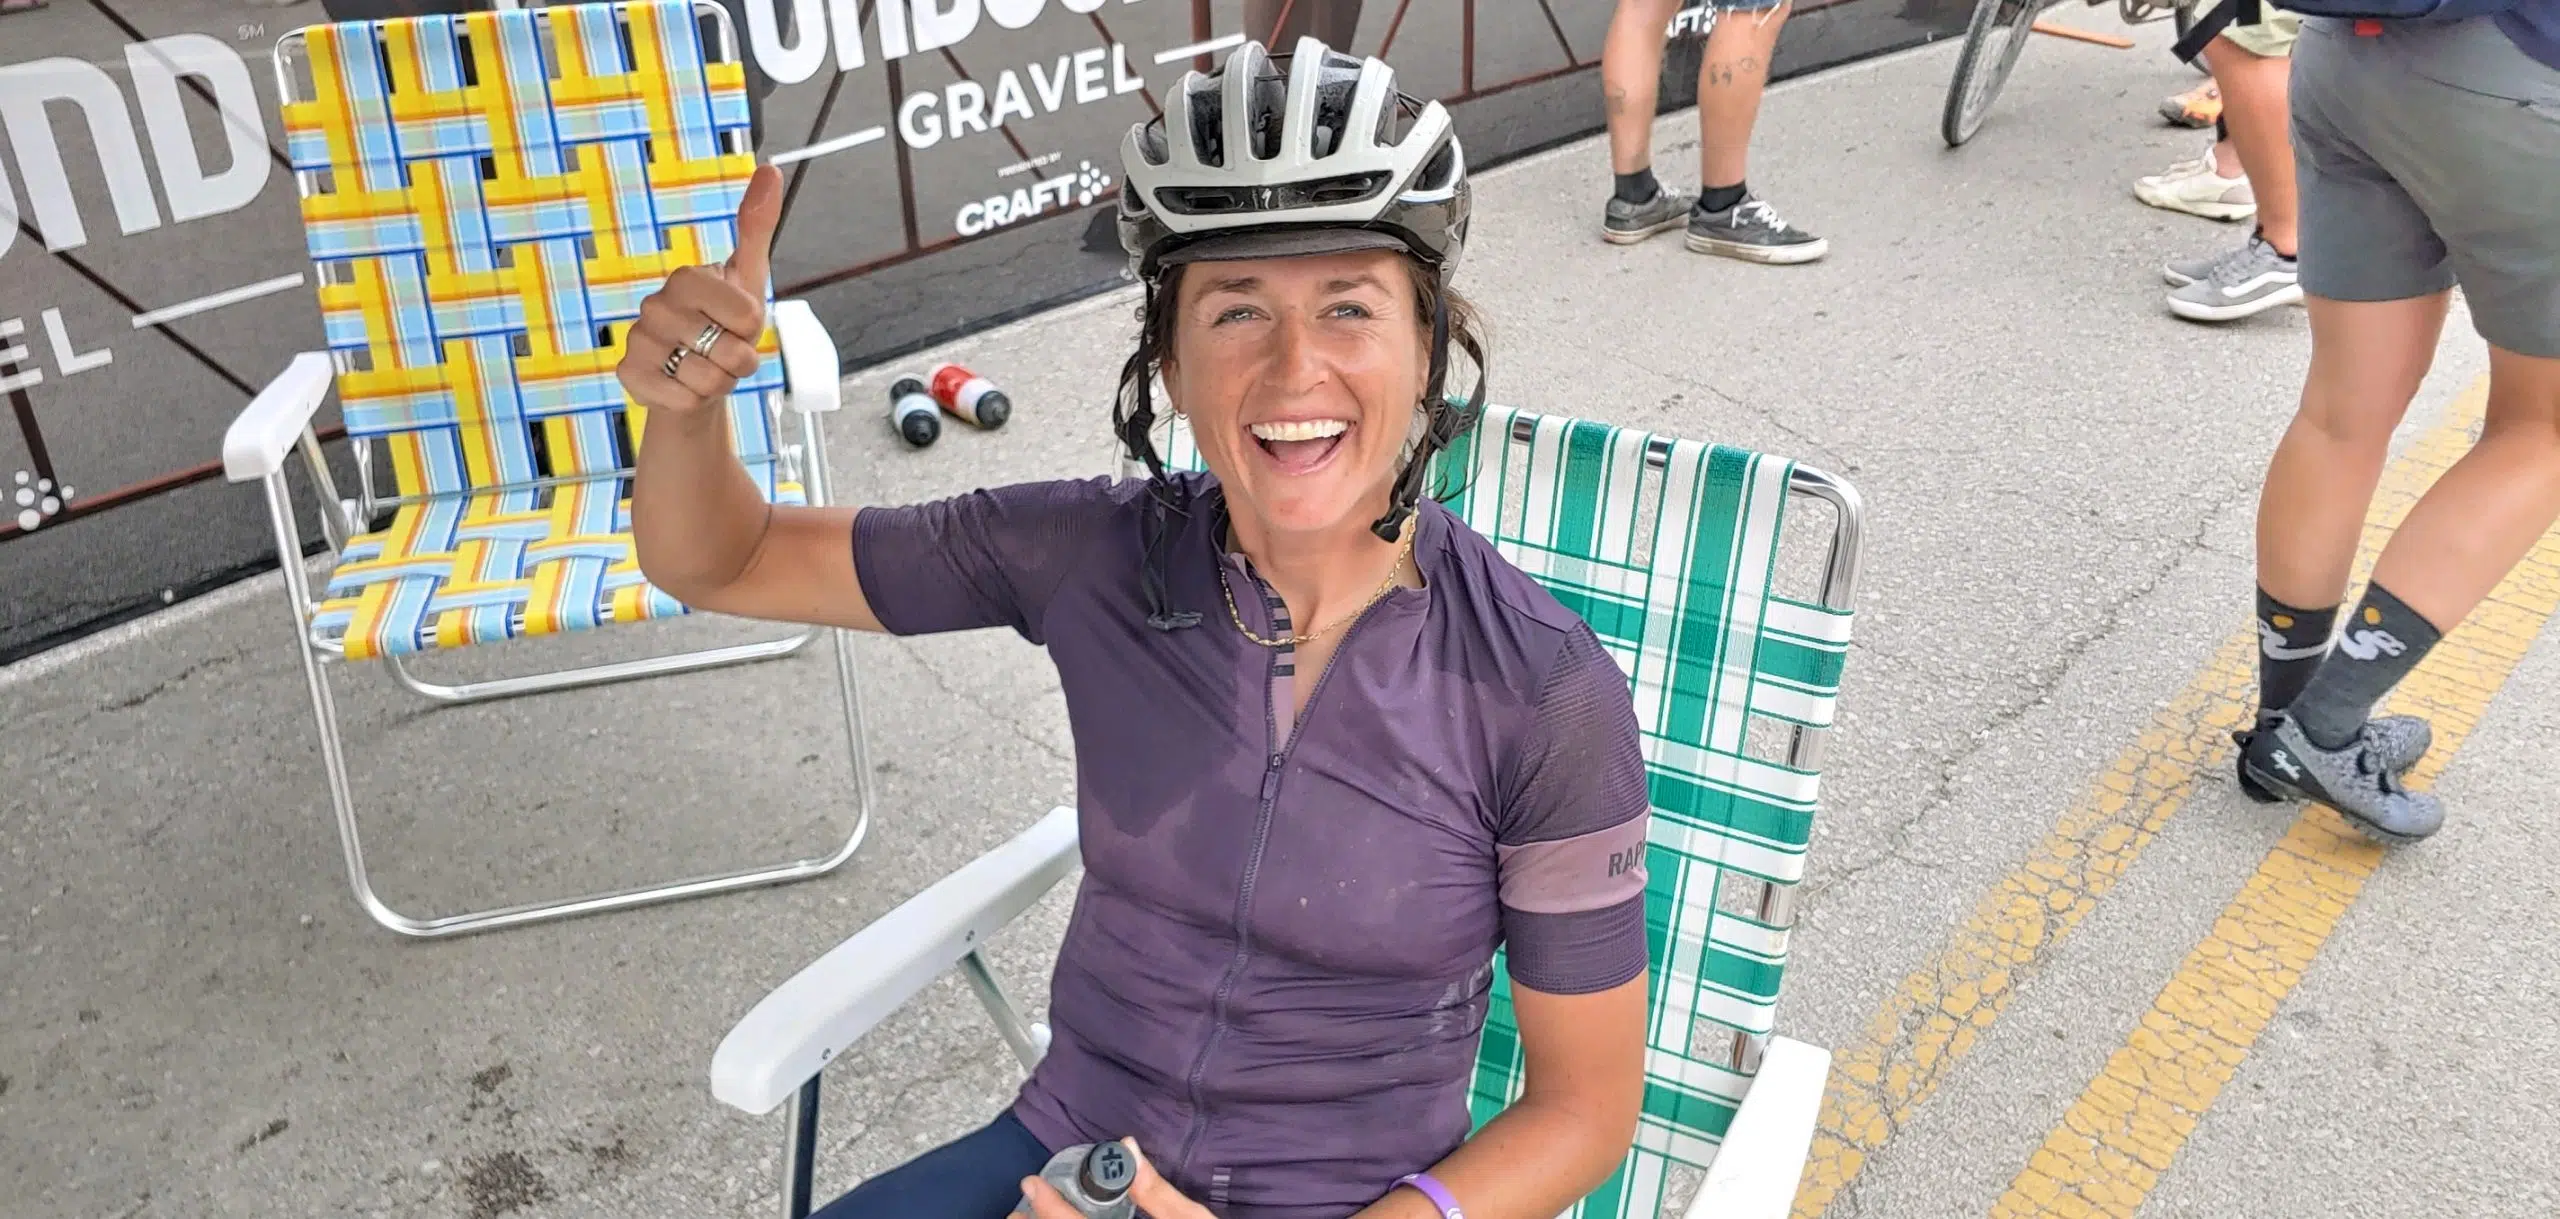 2021 Garmin Unbound Gravel 100, 200 and XL 350 champions crowned Saturday